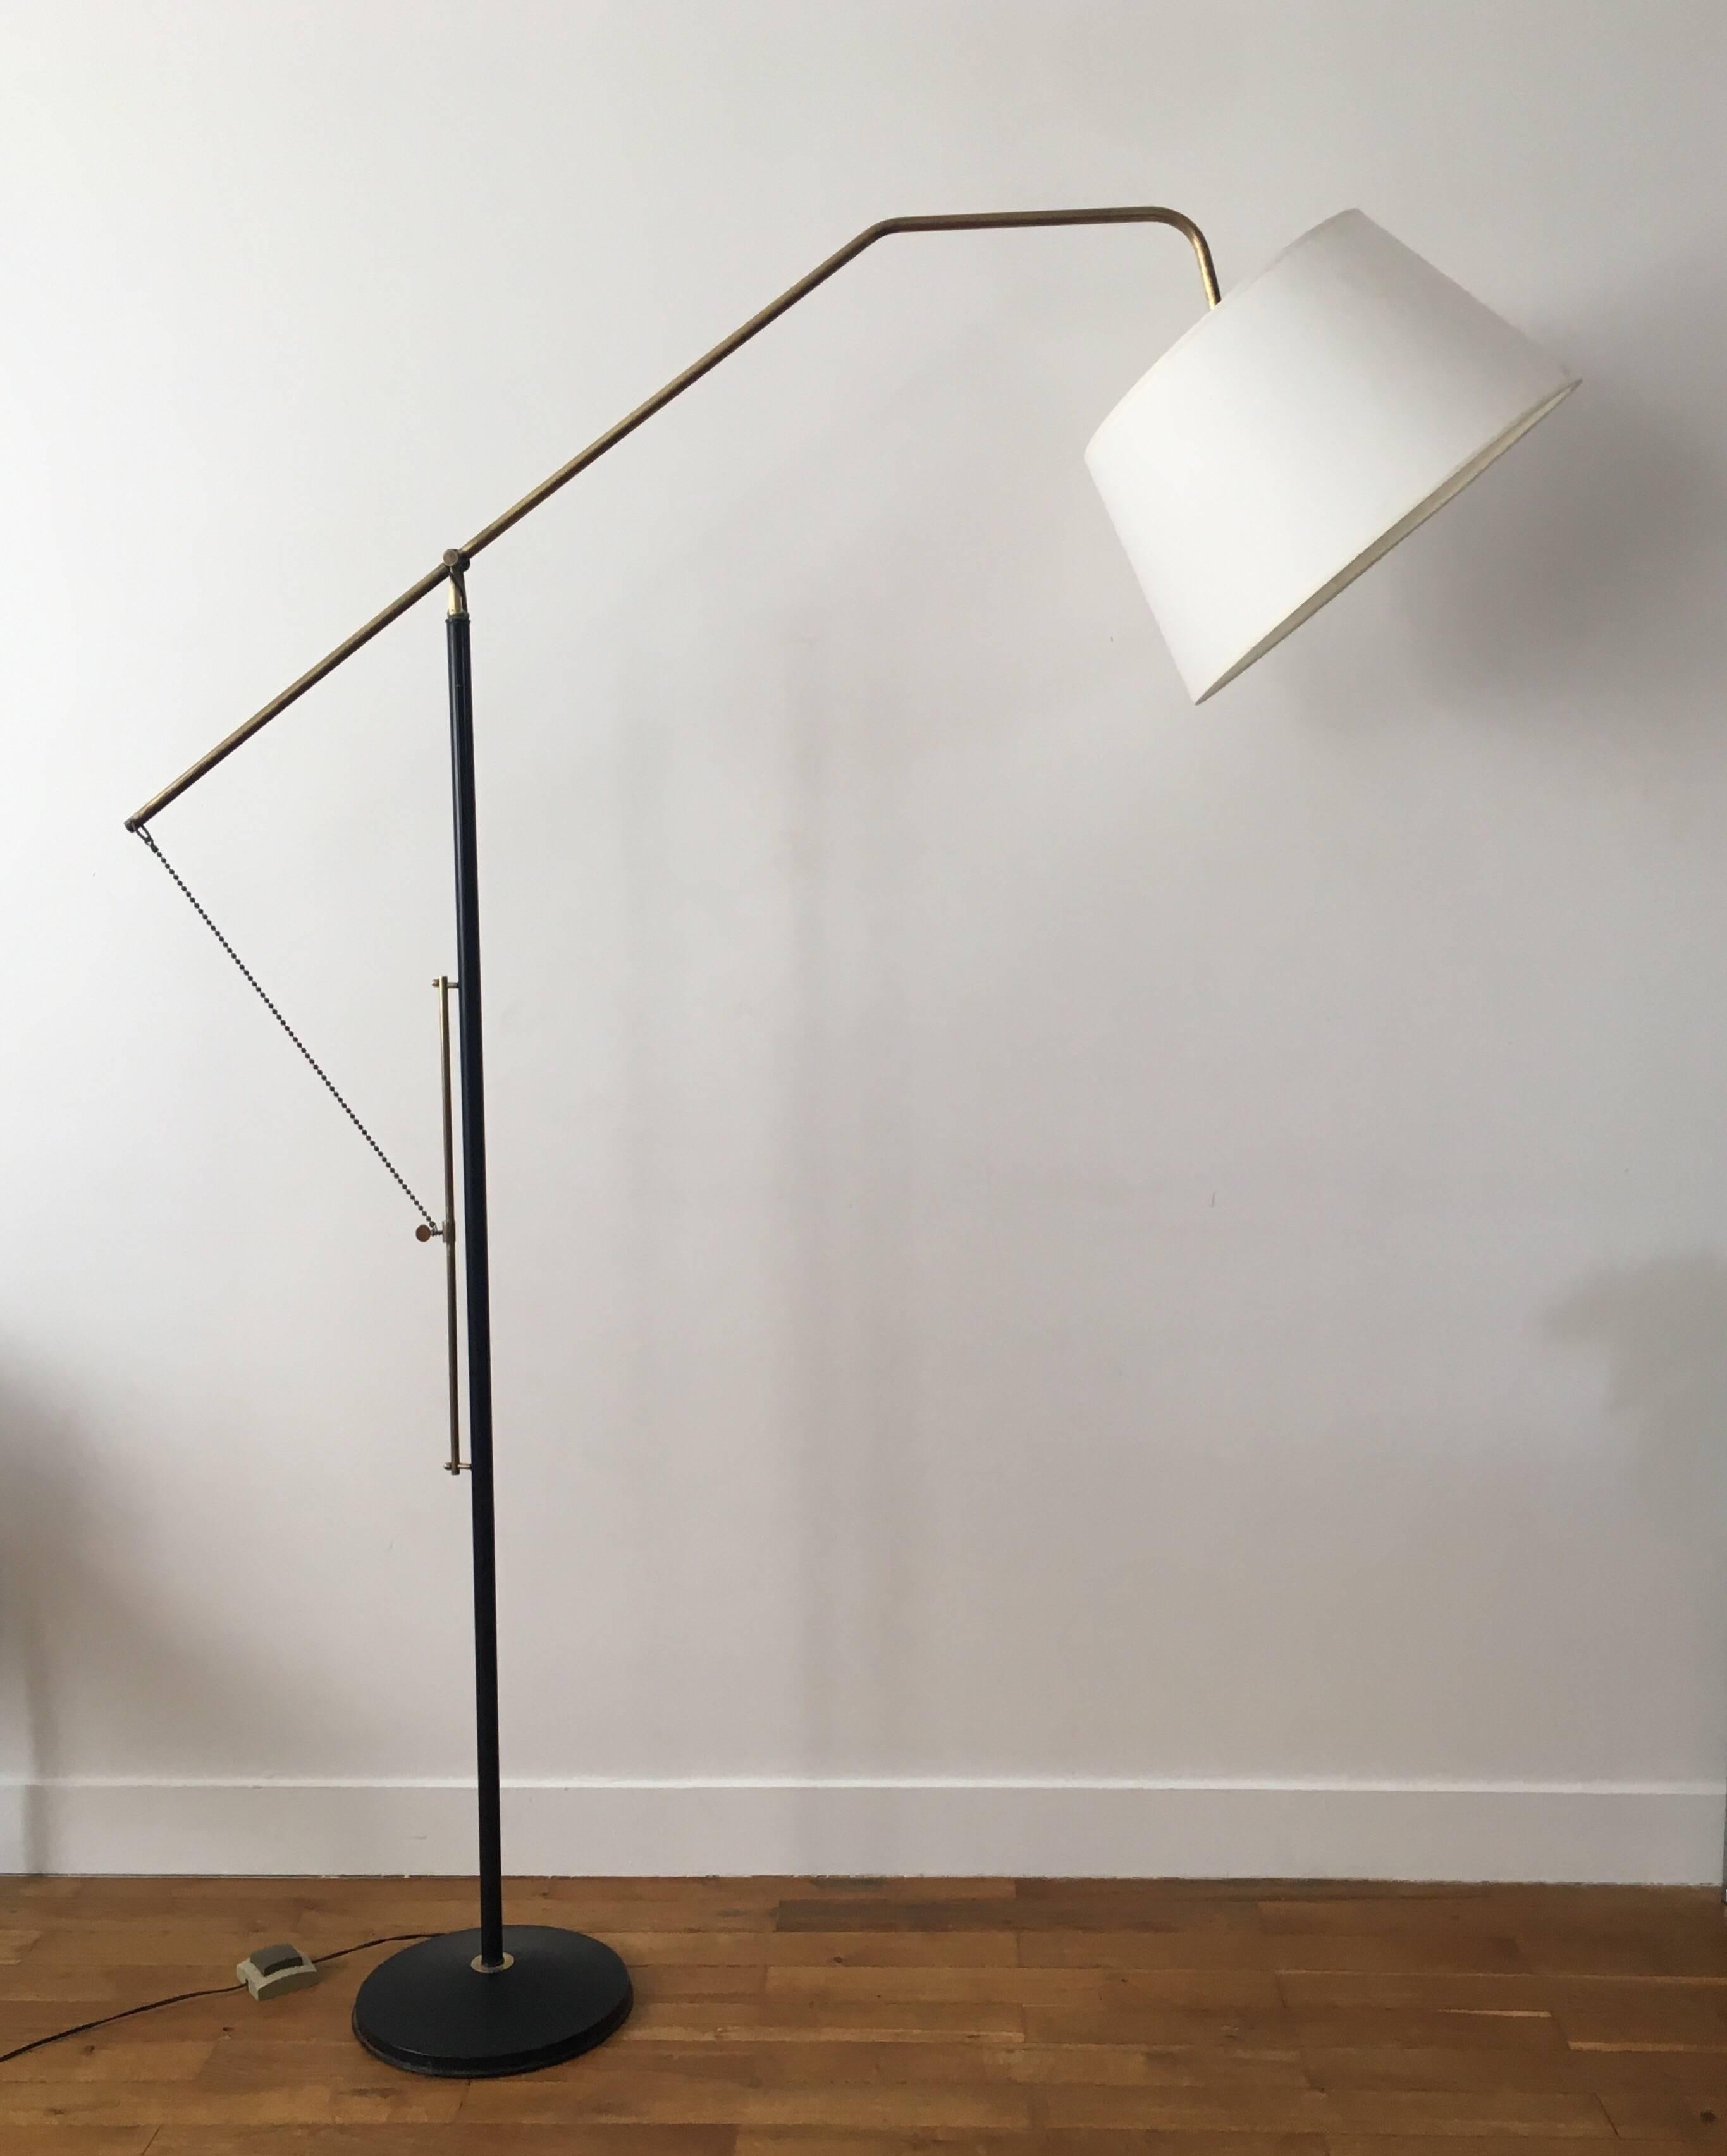 Rare adjustable floor lamp by Maison Arlus in black painted metal and gilded brass, circa 1950.
Interesting adjustable system.
The head (shade part) is also adjustable.
The height can be adjusted from 120 cm to 205 cm.



 